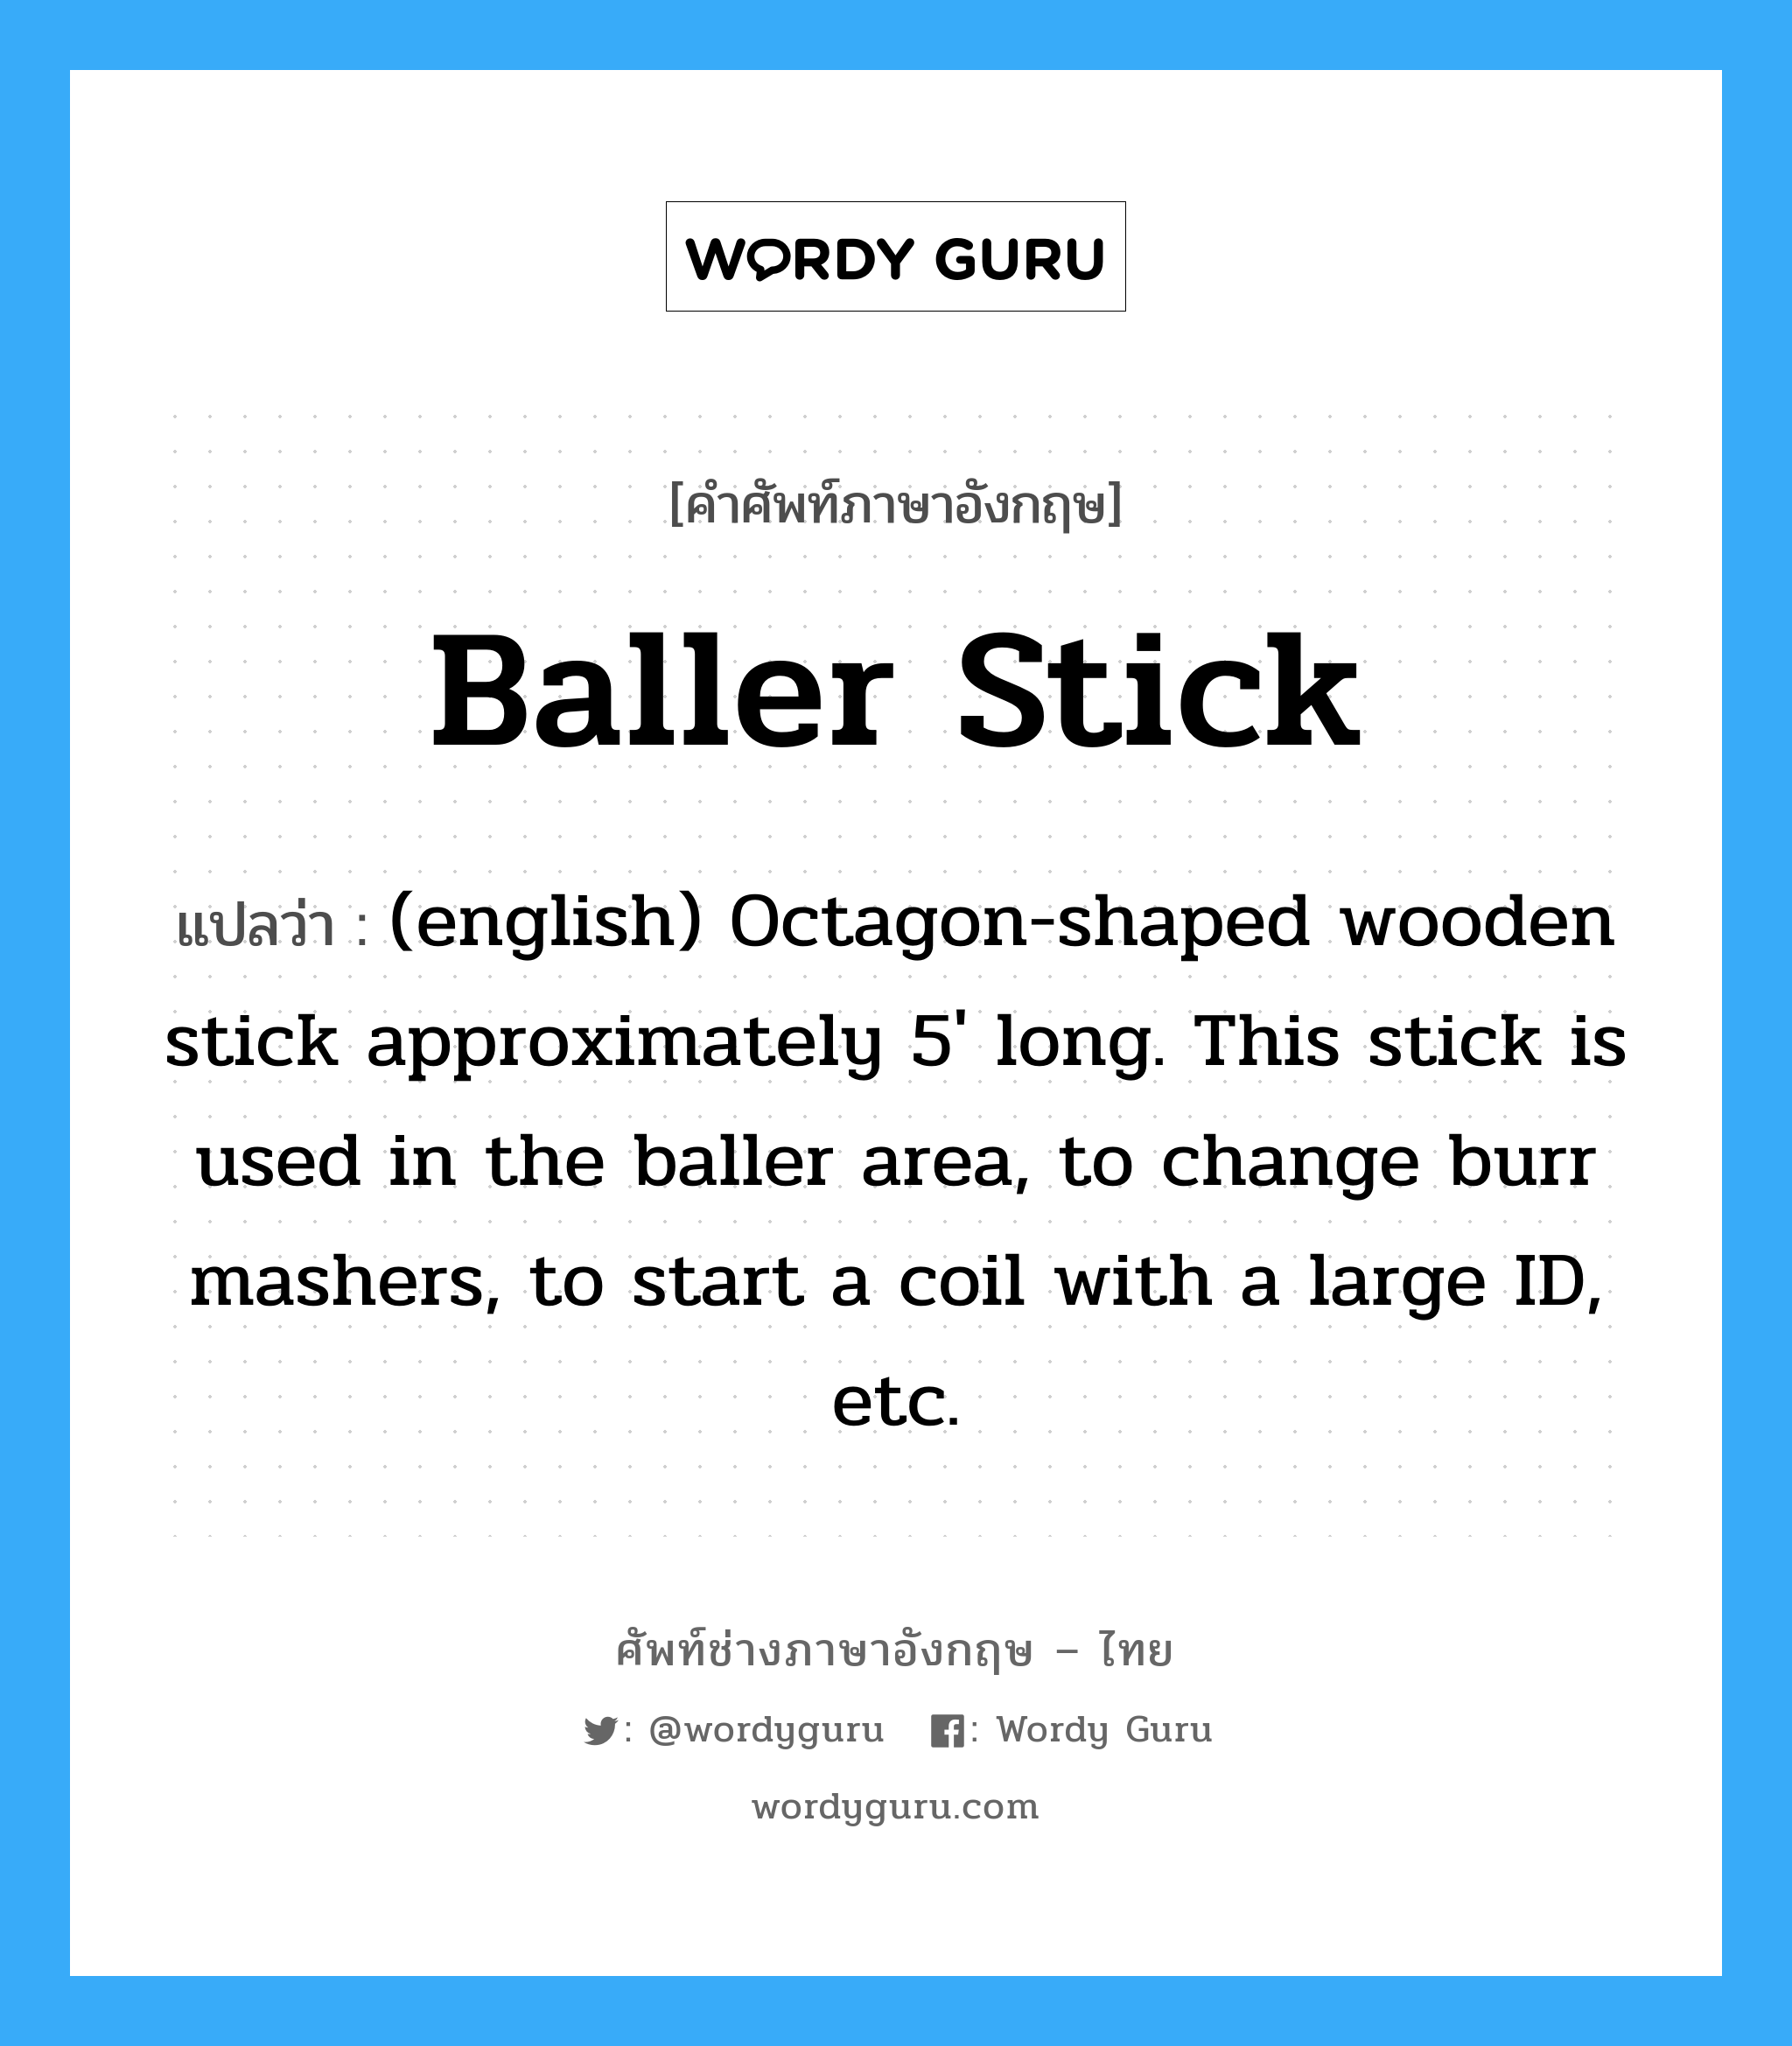 Baller Stick แปลว่า?, คำศัพท์ช่างภาษาอังกฤษ - ไทย Baller Stick คำศัพท์ภาษาอังกฤษ Baller Stick แปลว่า (english) Octagon-shaped wooden stick approximately 5' long. This stick is used in the baller area, to change burr mashers, to start a coil with a large ID, etc.